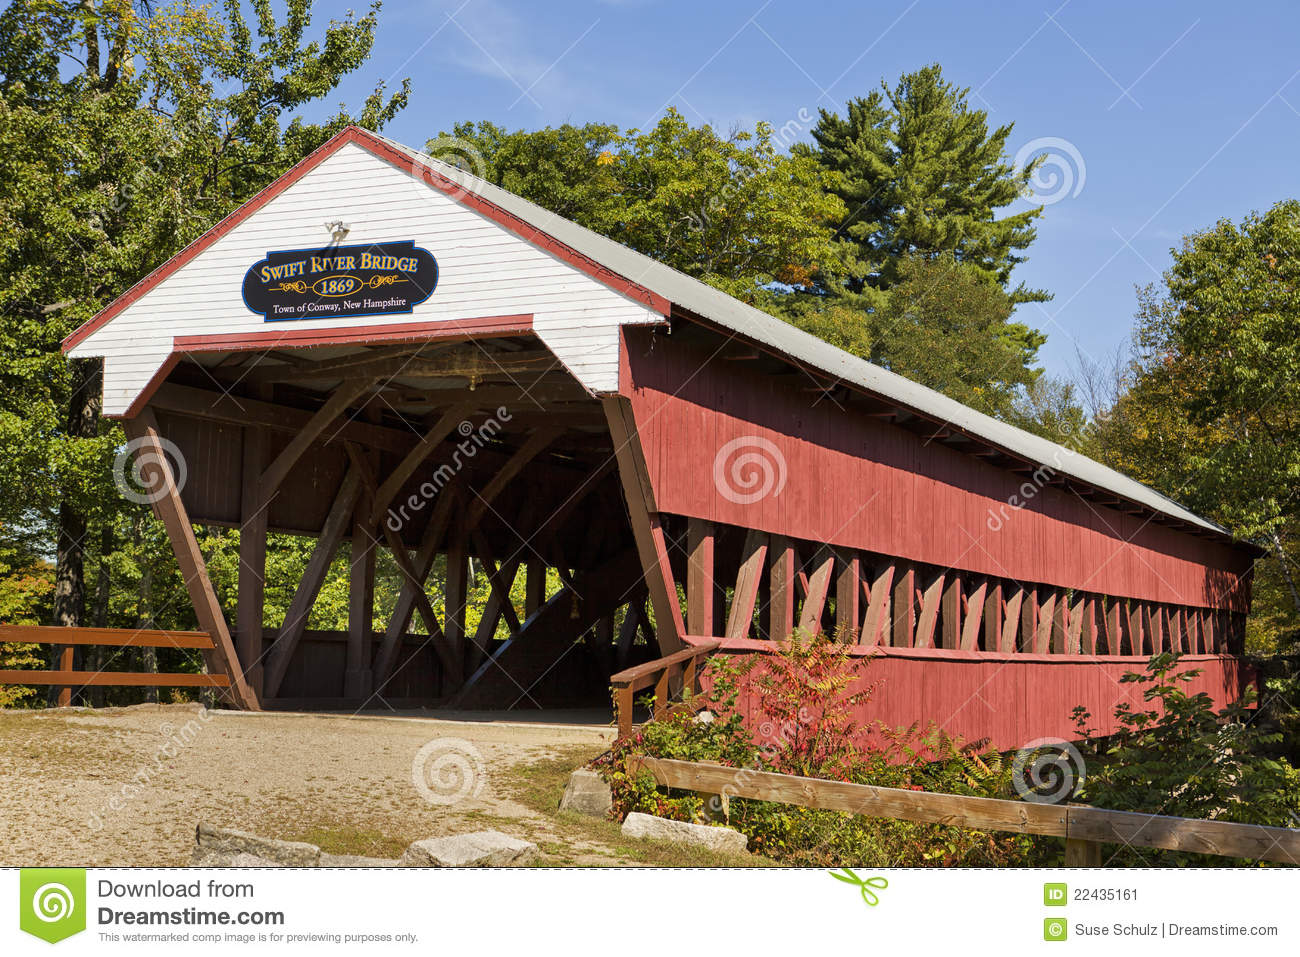 Covered Bridge In Conway Nh Stock Image   Image  22435161